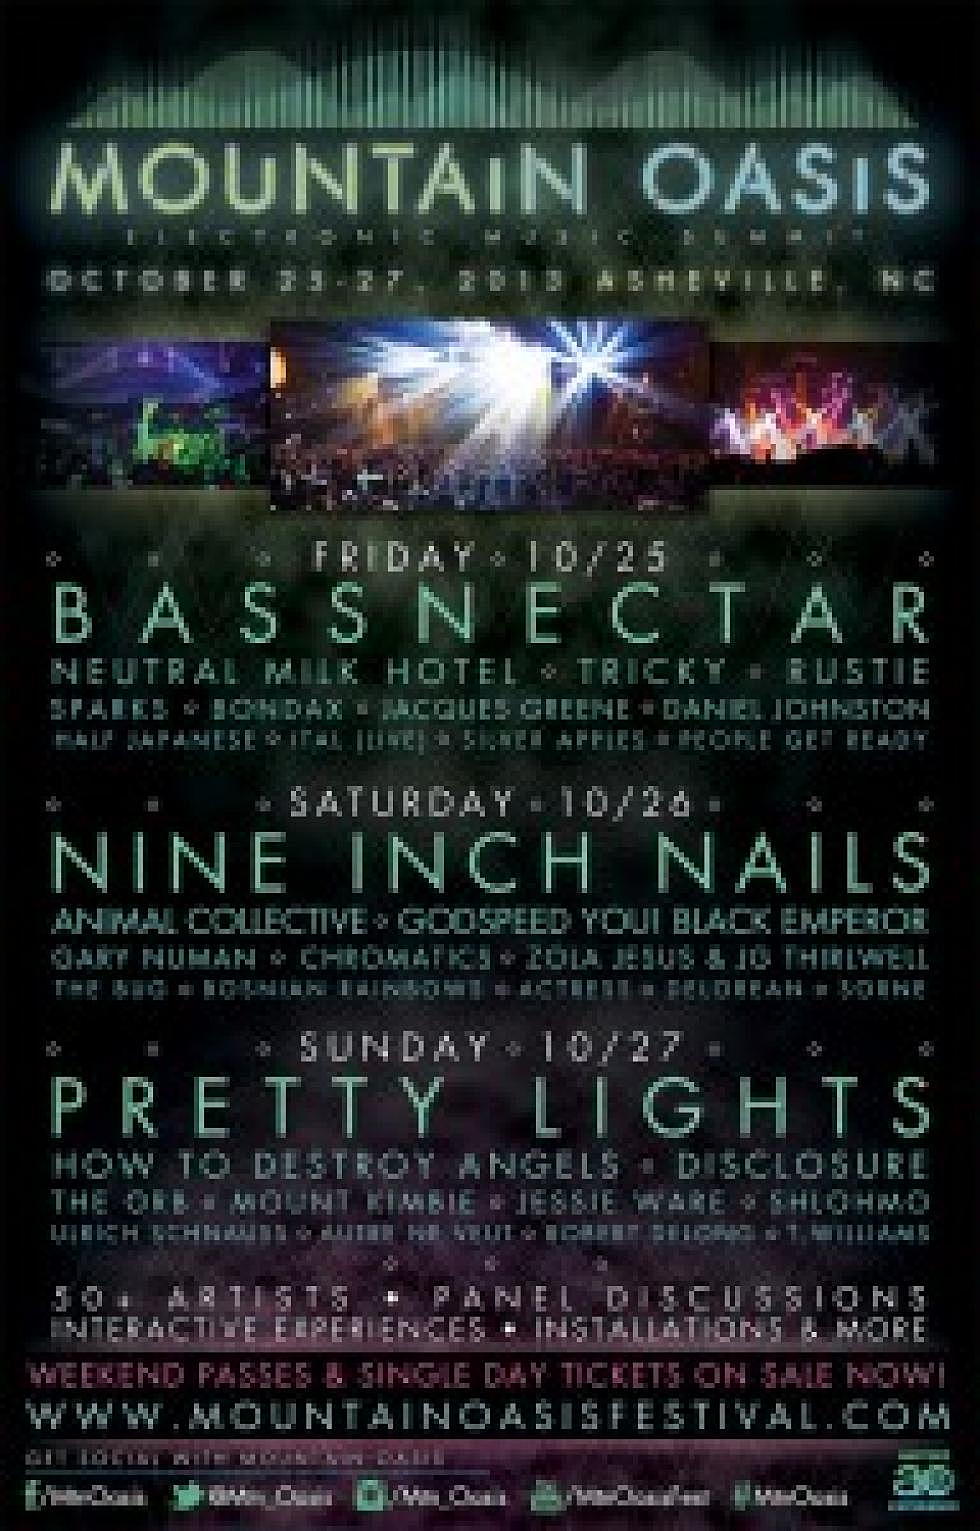 Mountain Oasis Electronic Music Summit announces part of its 2013 lineup